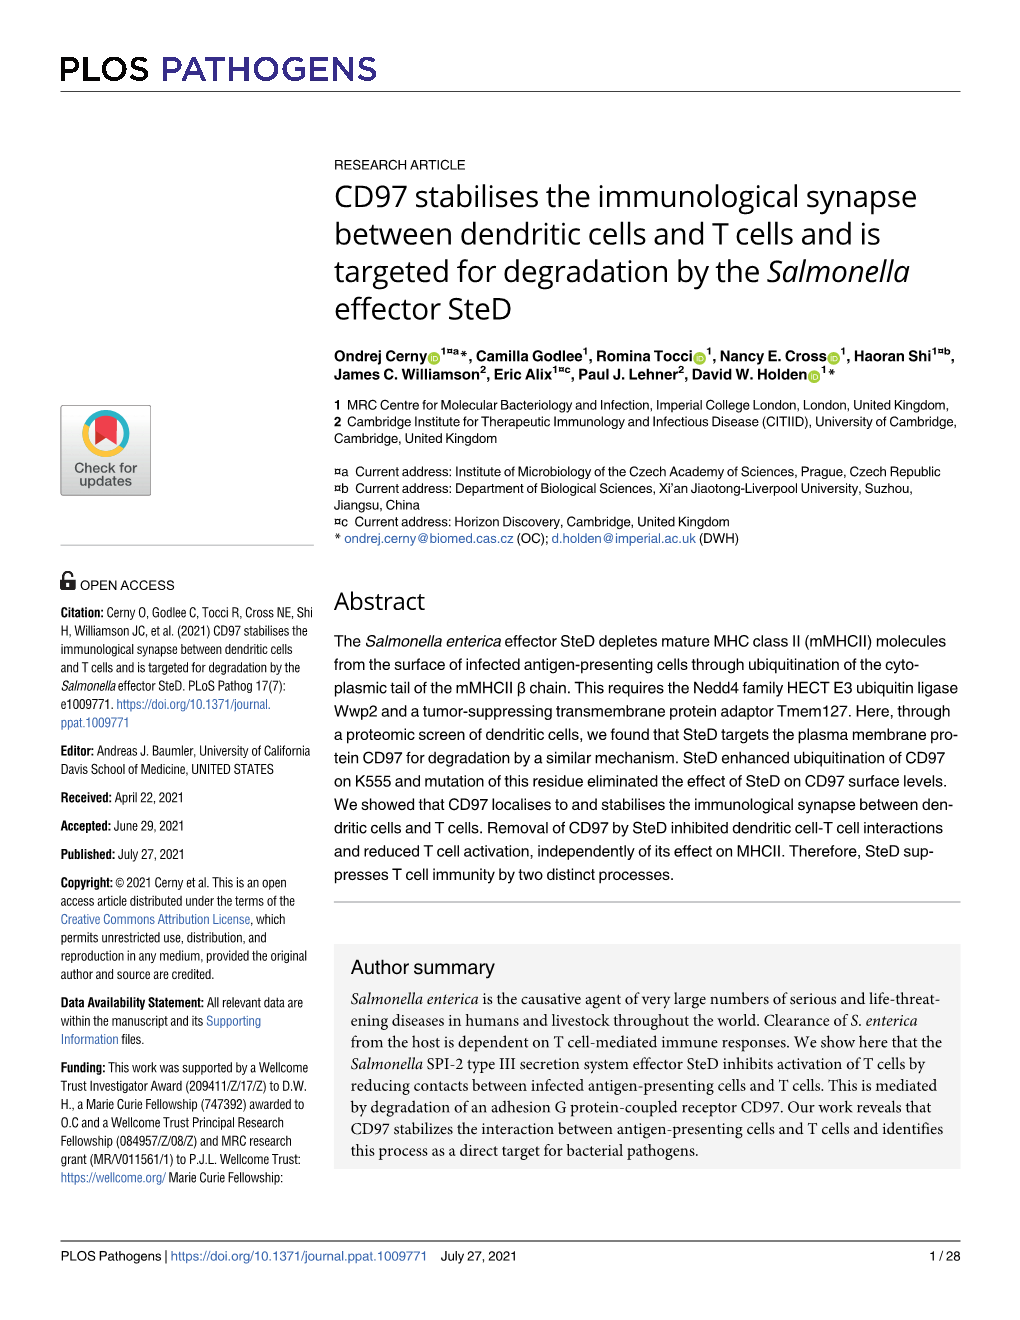 CD97 Stabilises the Immunological Synapse Between Dendritic Cells and T Cells and Is Targeted for Degradation by the Salmonella Effector Sted